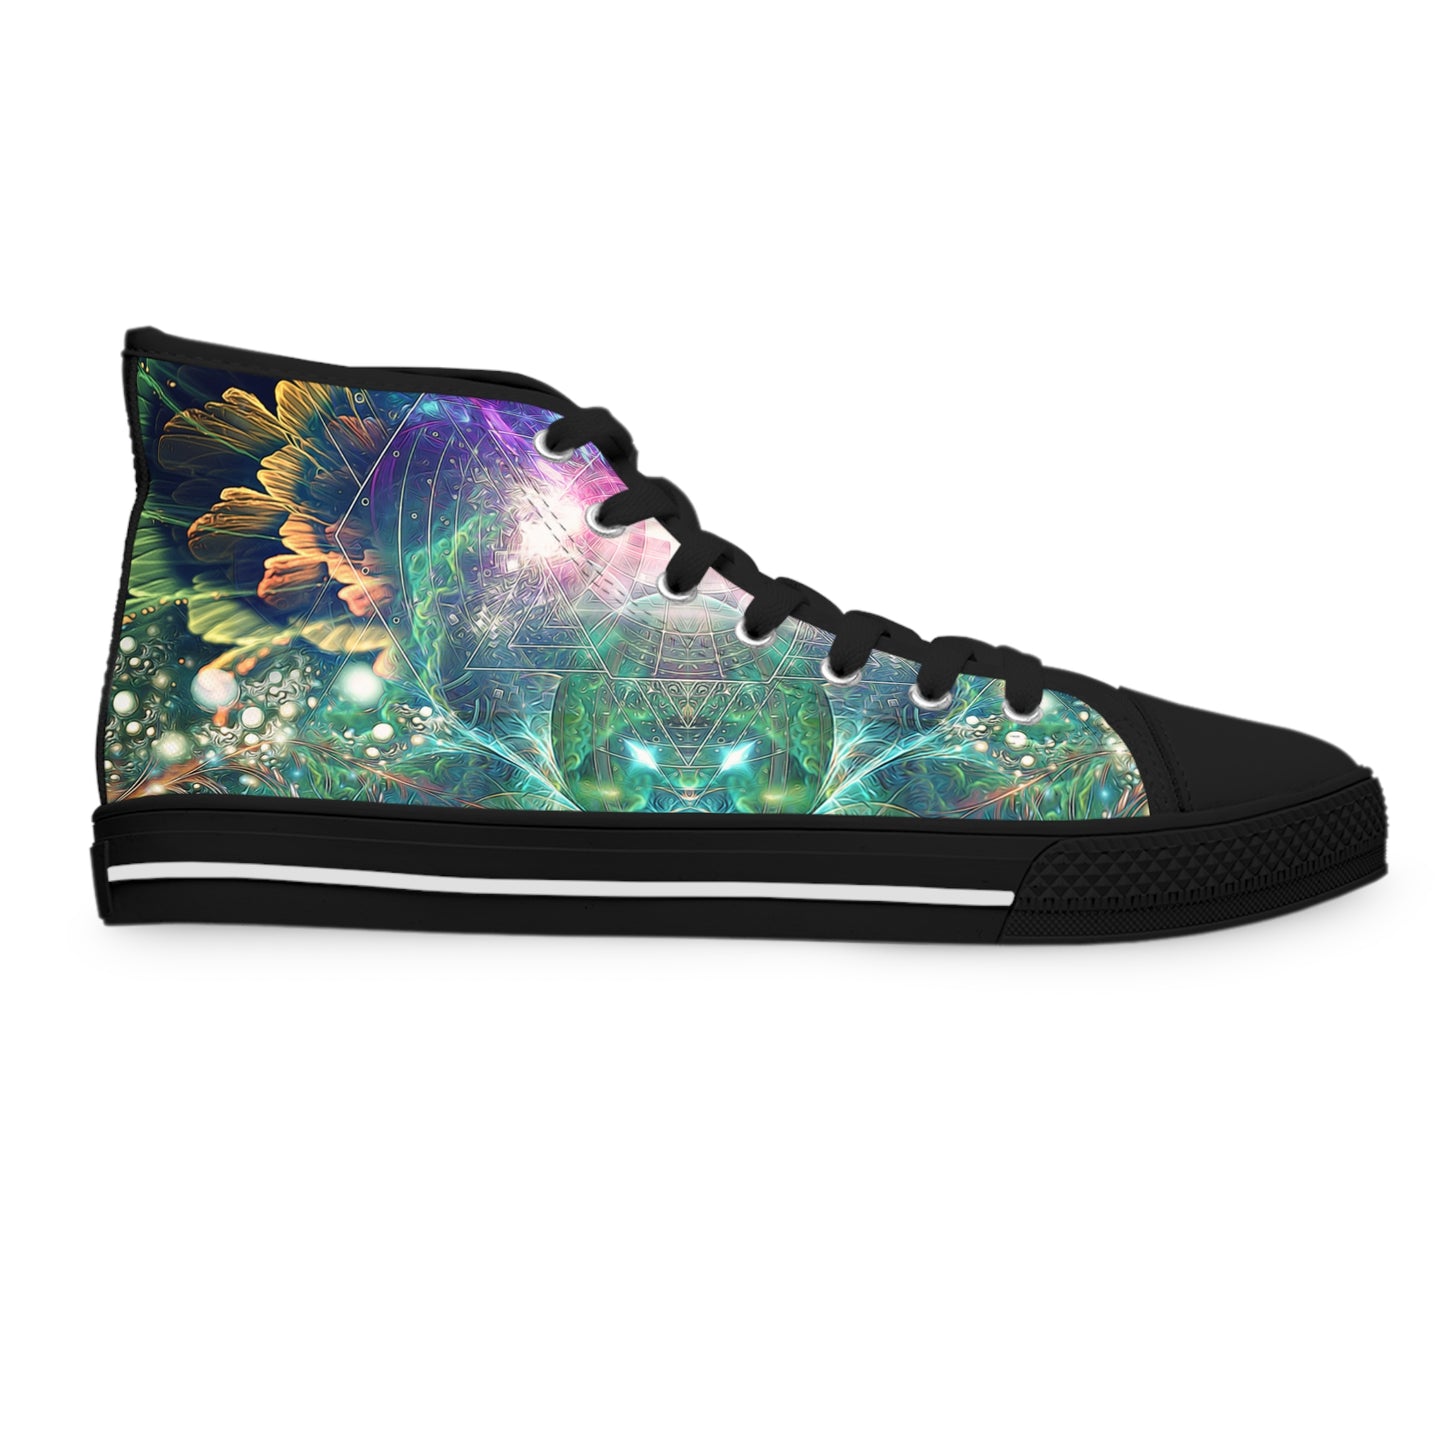 "Nectar / Blossom" WOMEN'S HIGHT TOP SNEAKERS